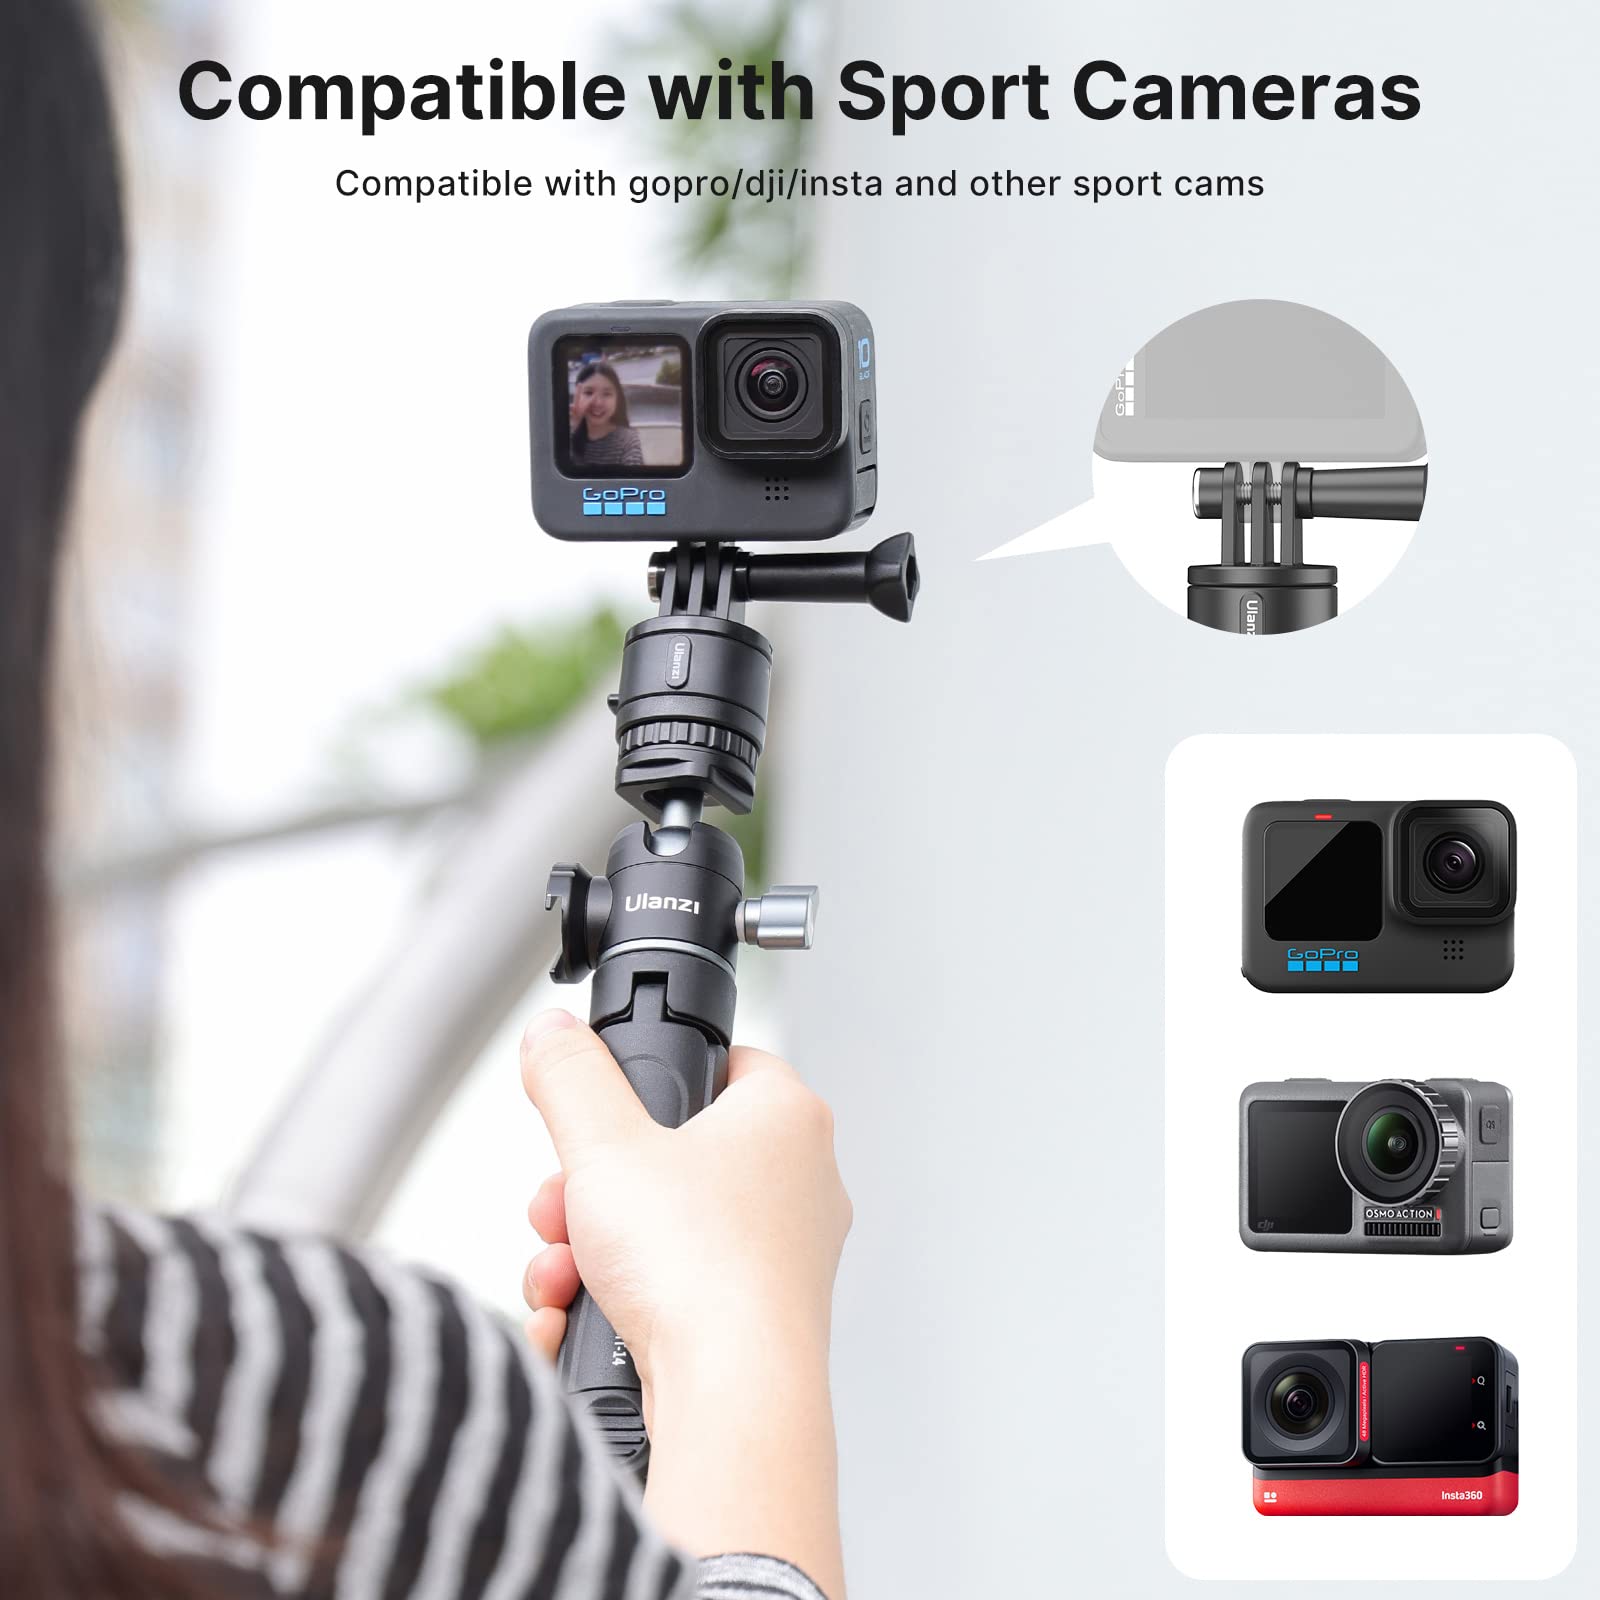 Tripod Mount Accessories for Gopro Hero - Go Quick II Basic Set Magnetic Quick Release Adapter for Tripod/Bike/Helmet/Clamp Clip Mount/Suction Cup Compatible with Gopro 10 9 8 7 6 5 Black insta360